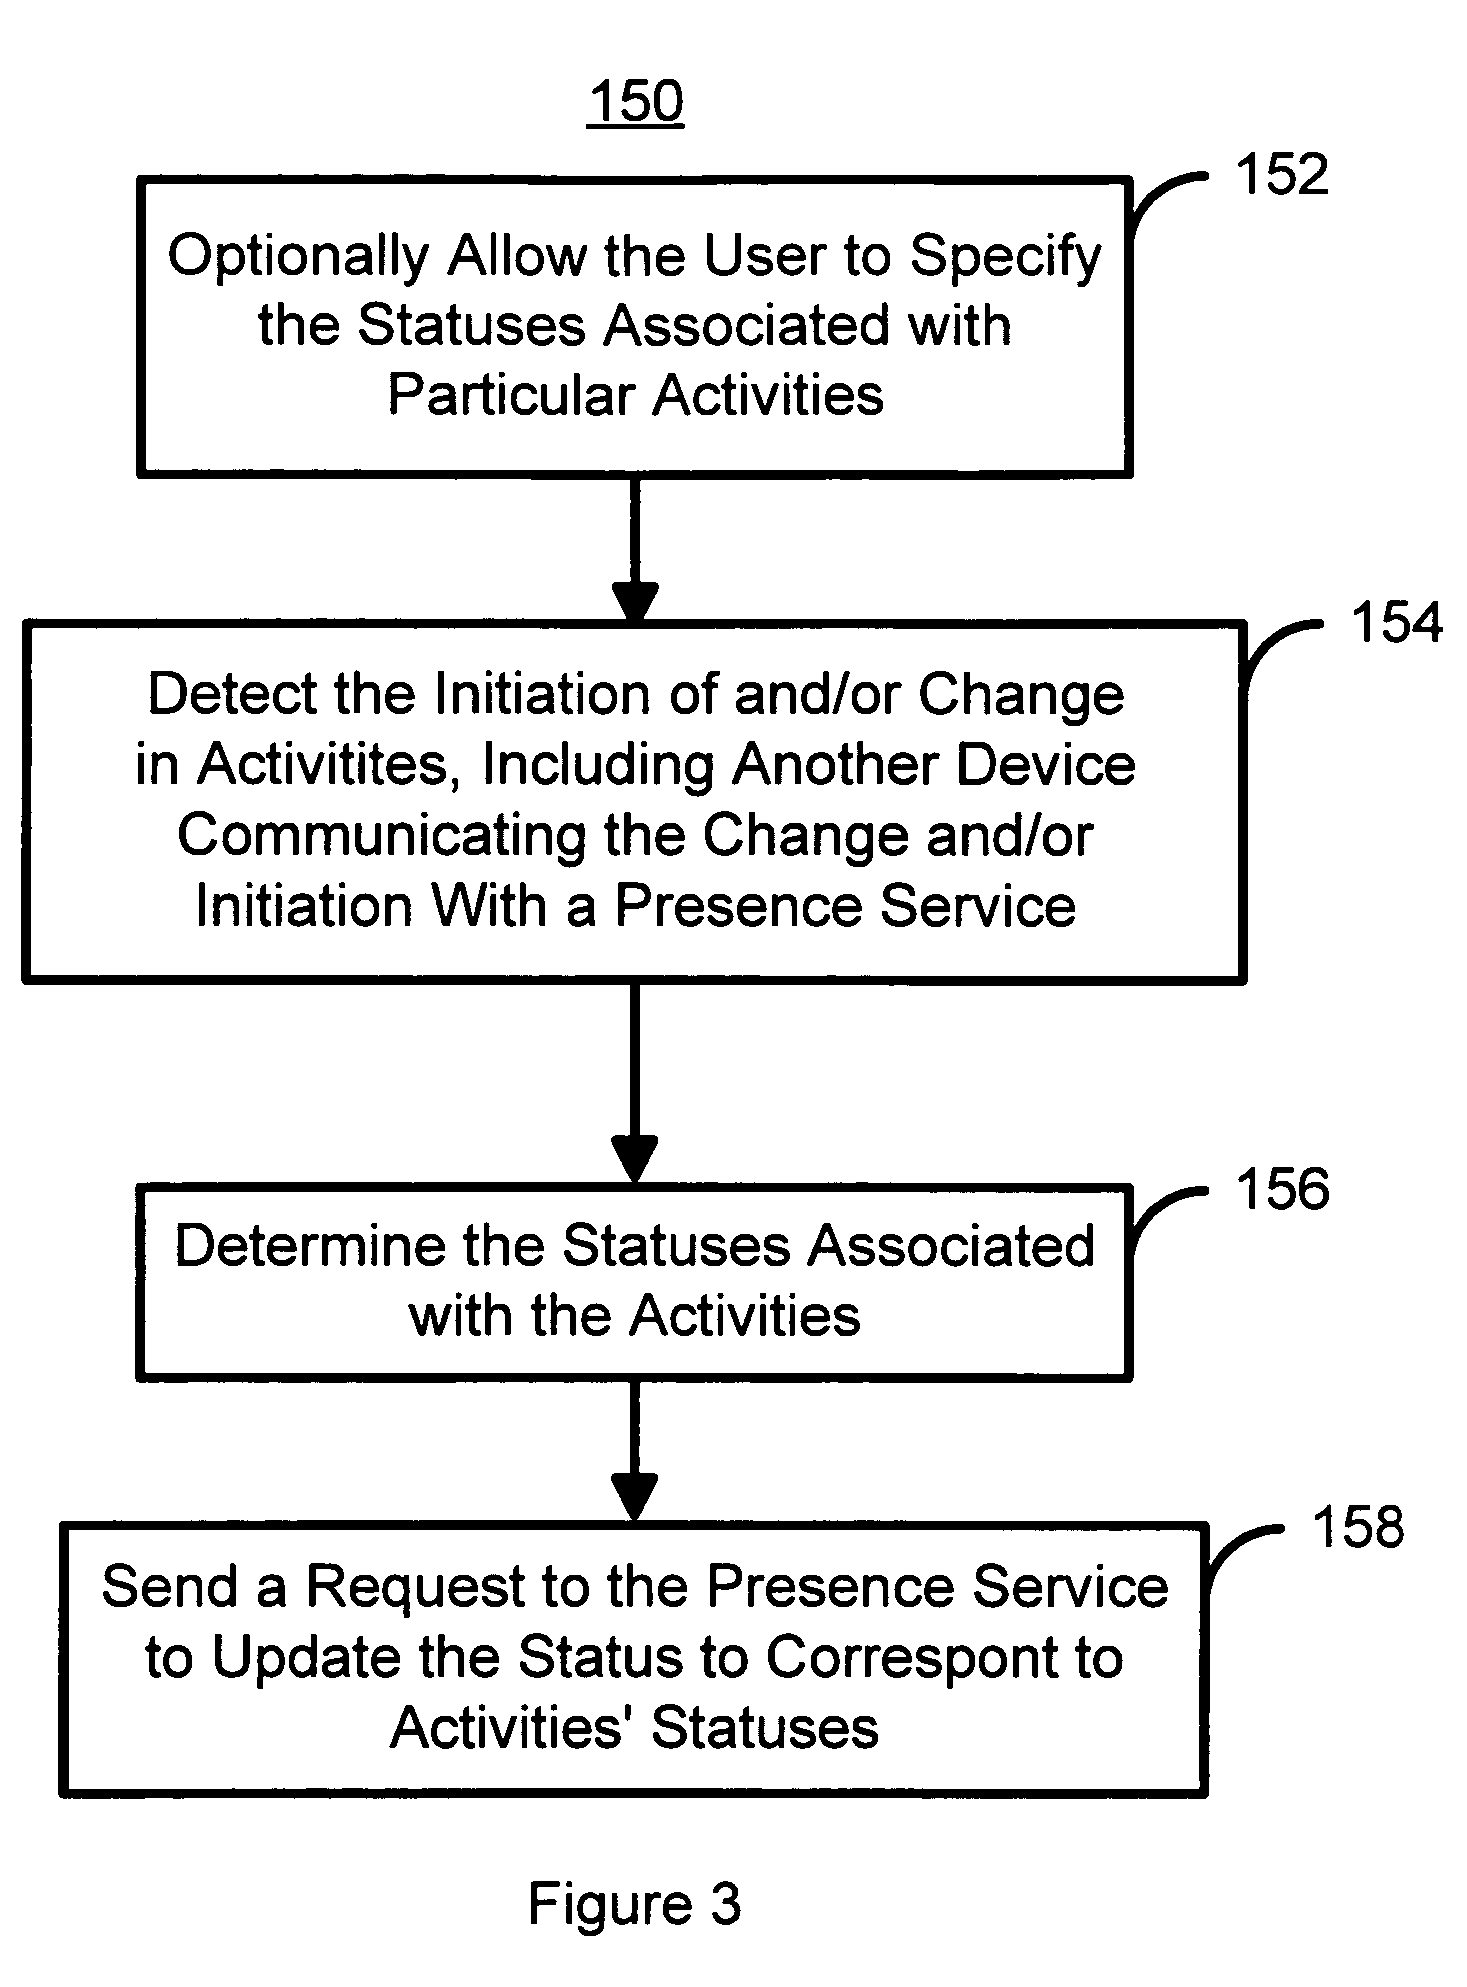 System and method for harmonizing changes in user activities, device capabilities and presence information